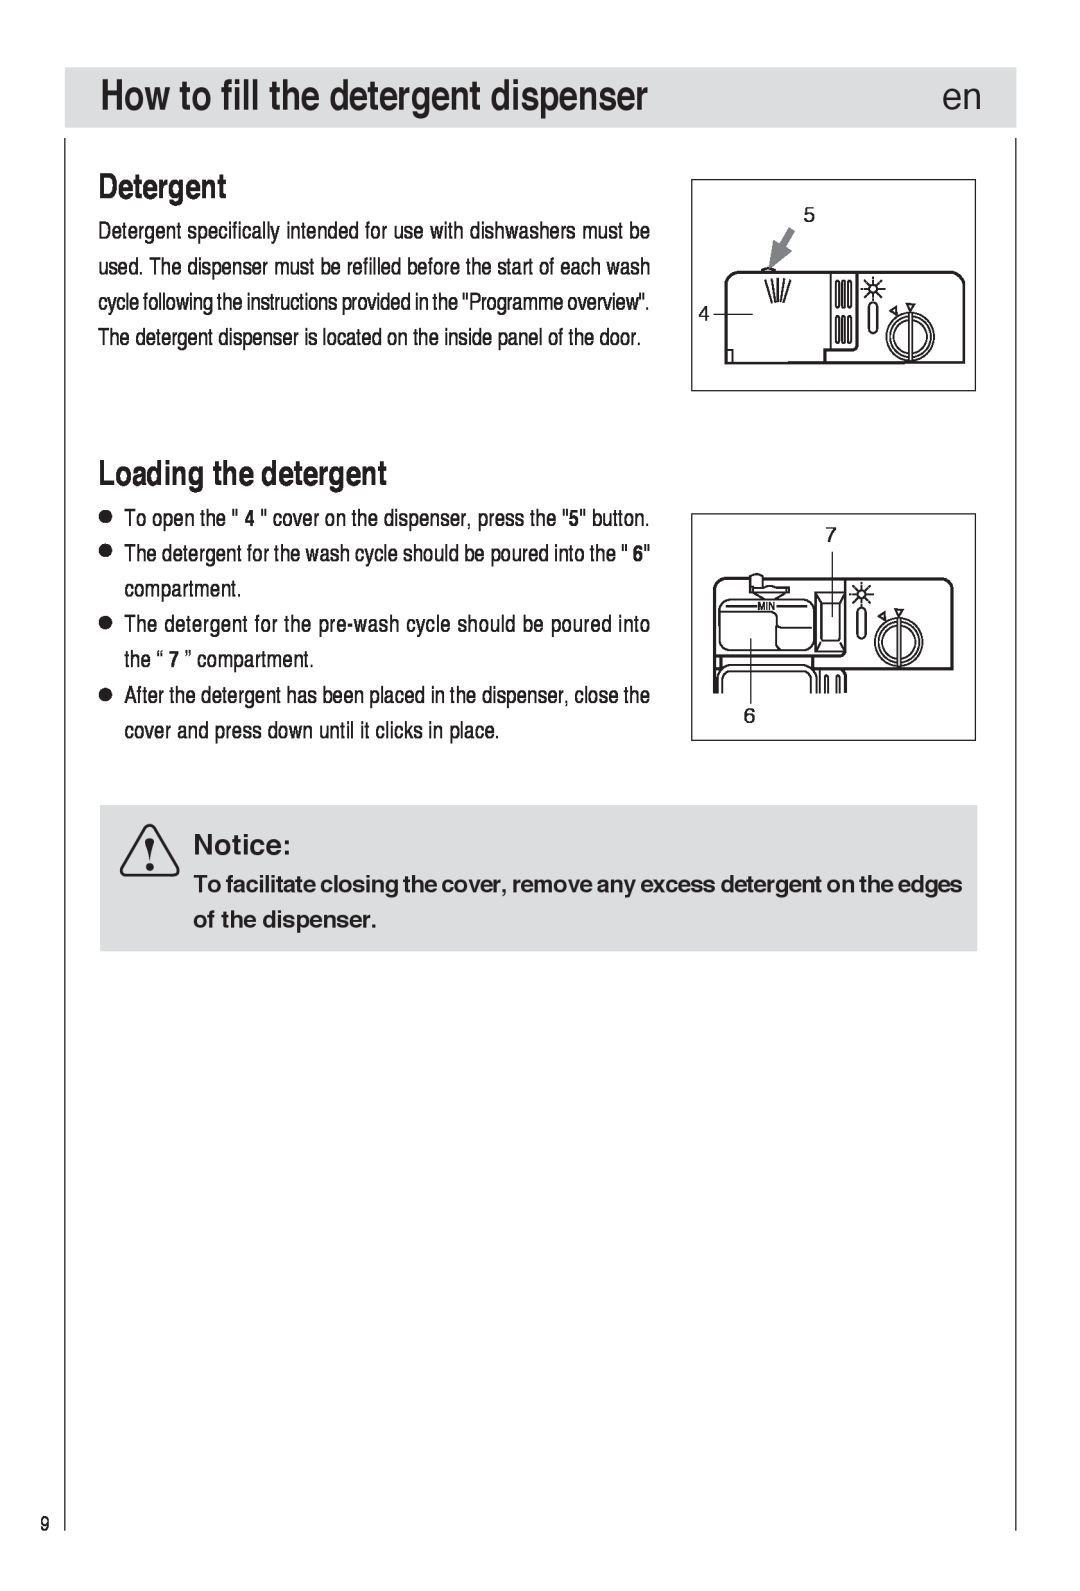 Haier DW9-TFE1 operation manual How to fill the detergent dispenser, Detergent, Loading the detergent 